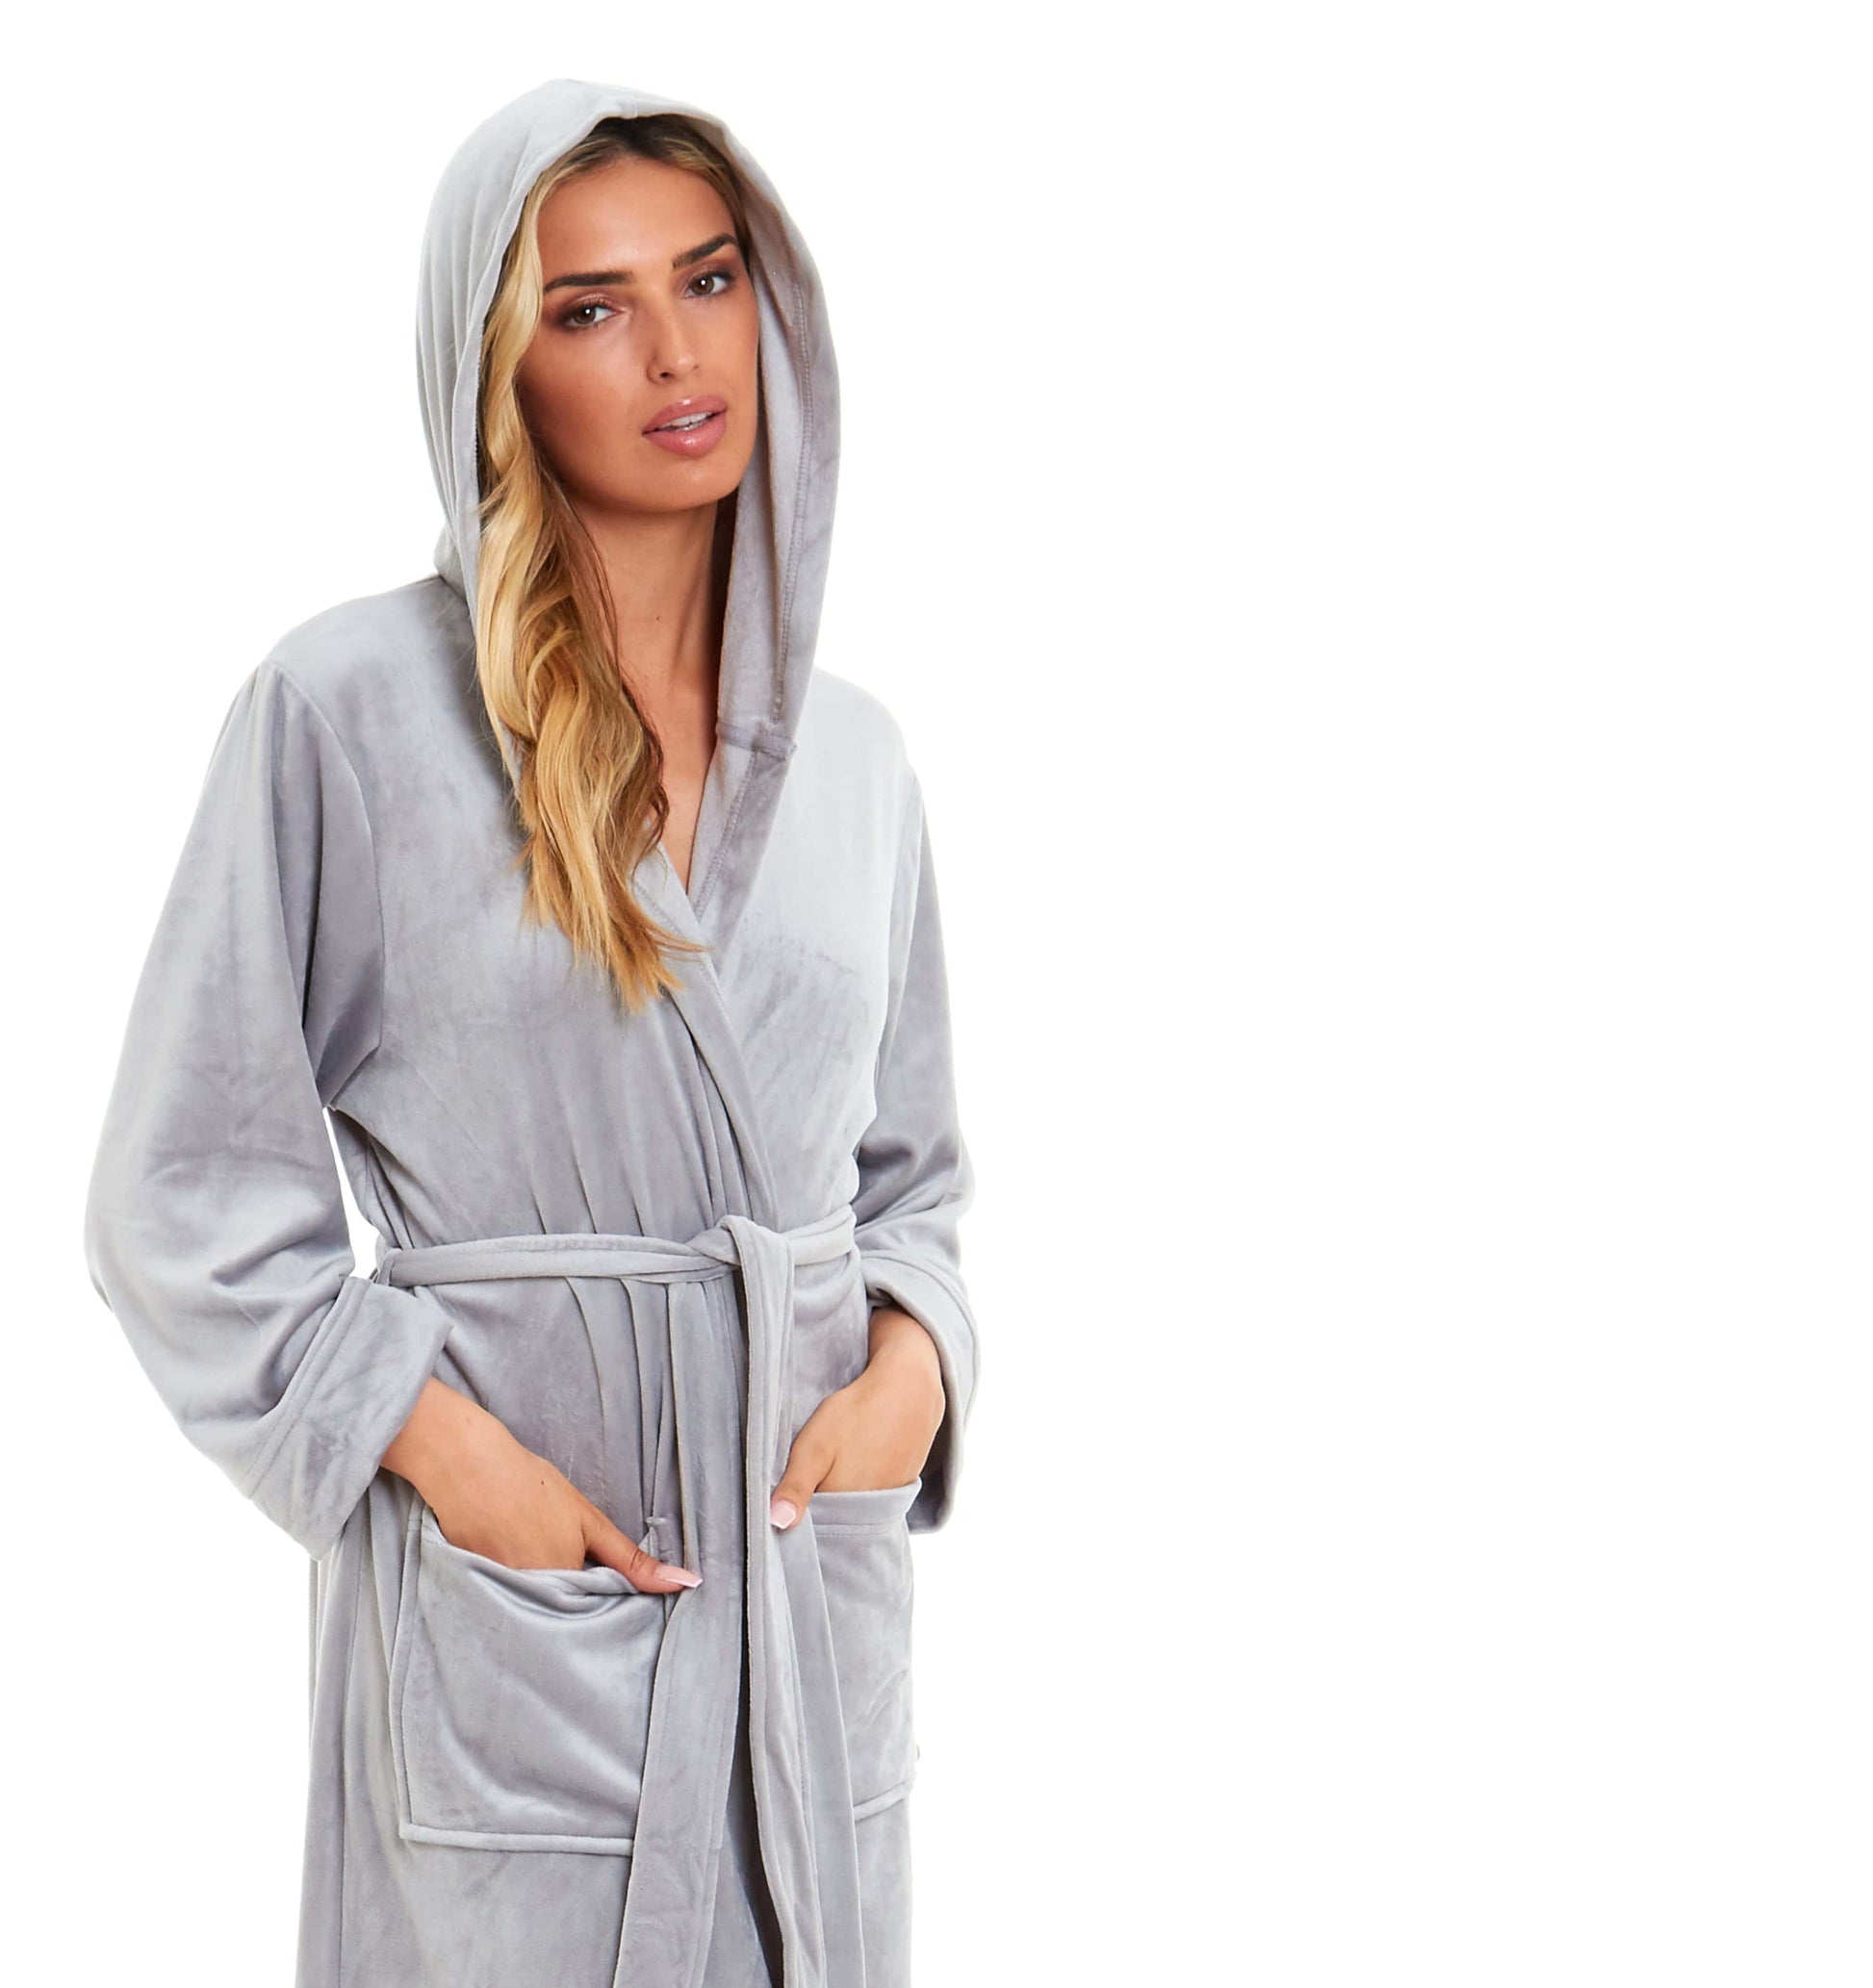 Fever Storybook Hooded Hottie - 26519   - Fever  Collection